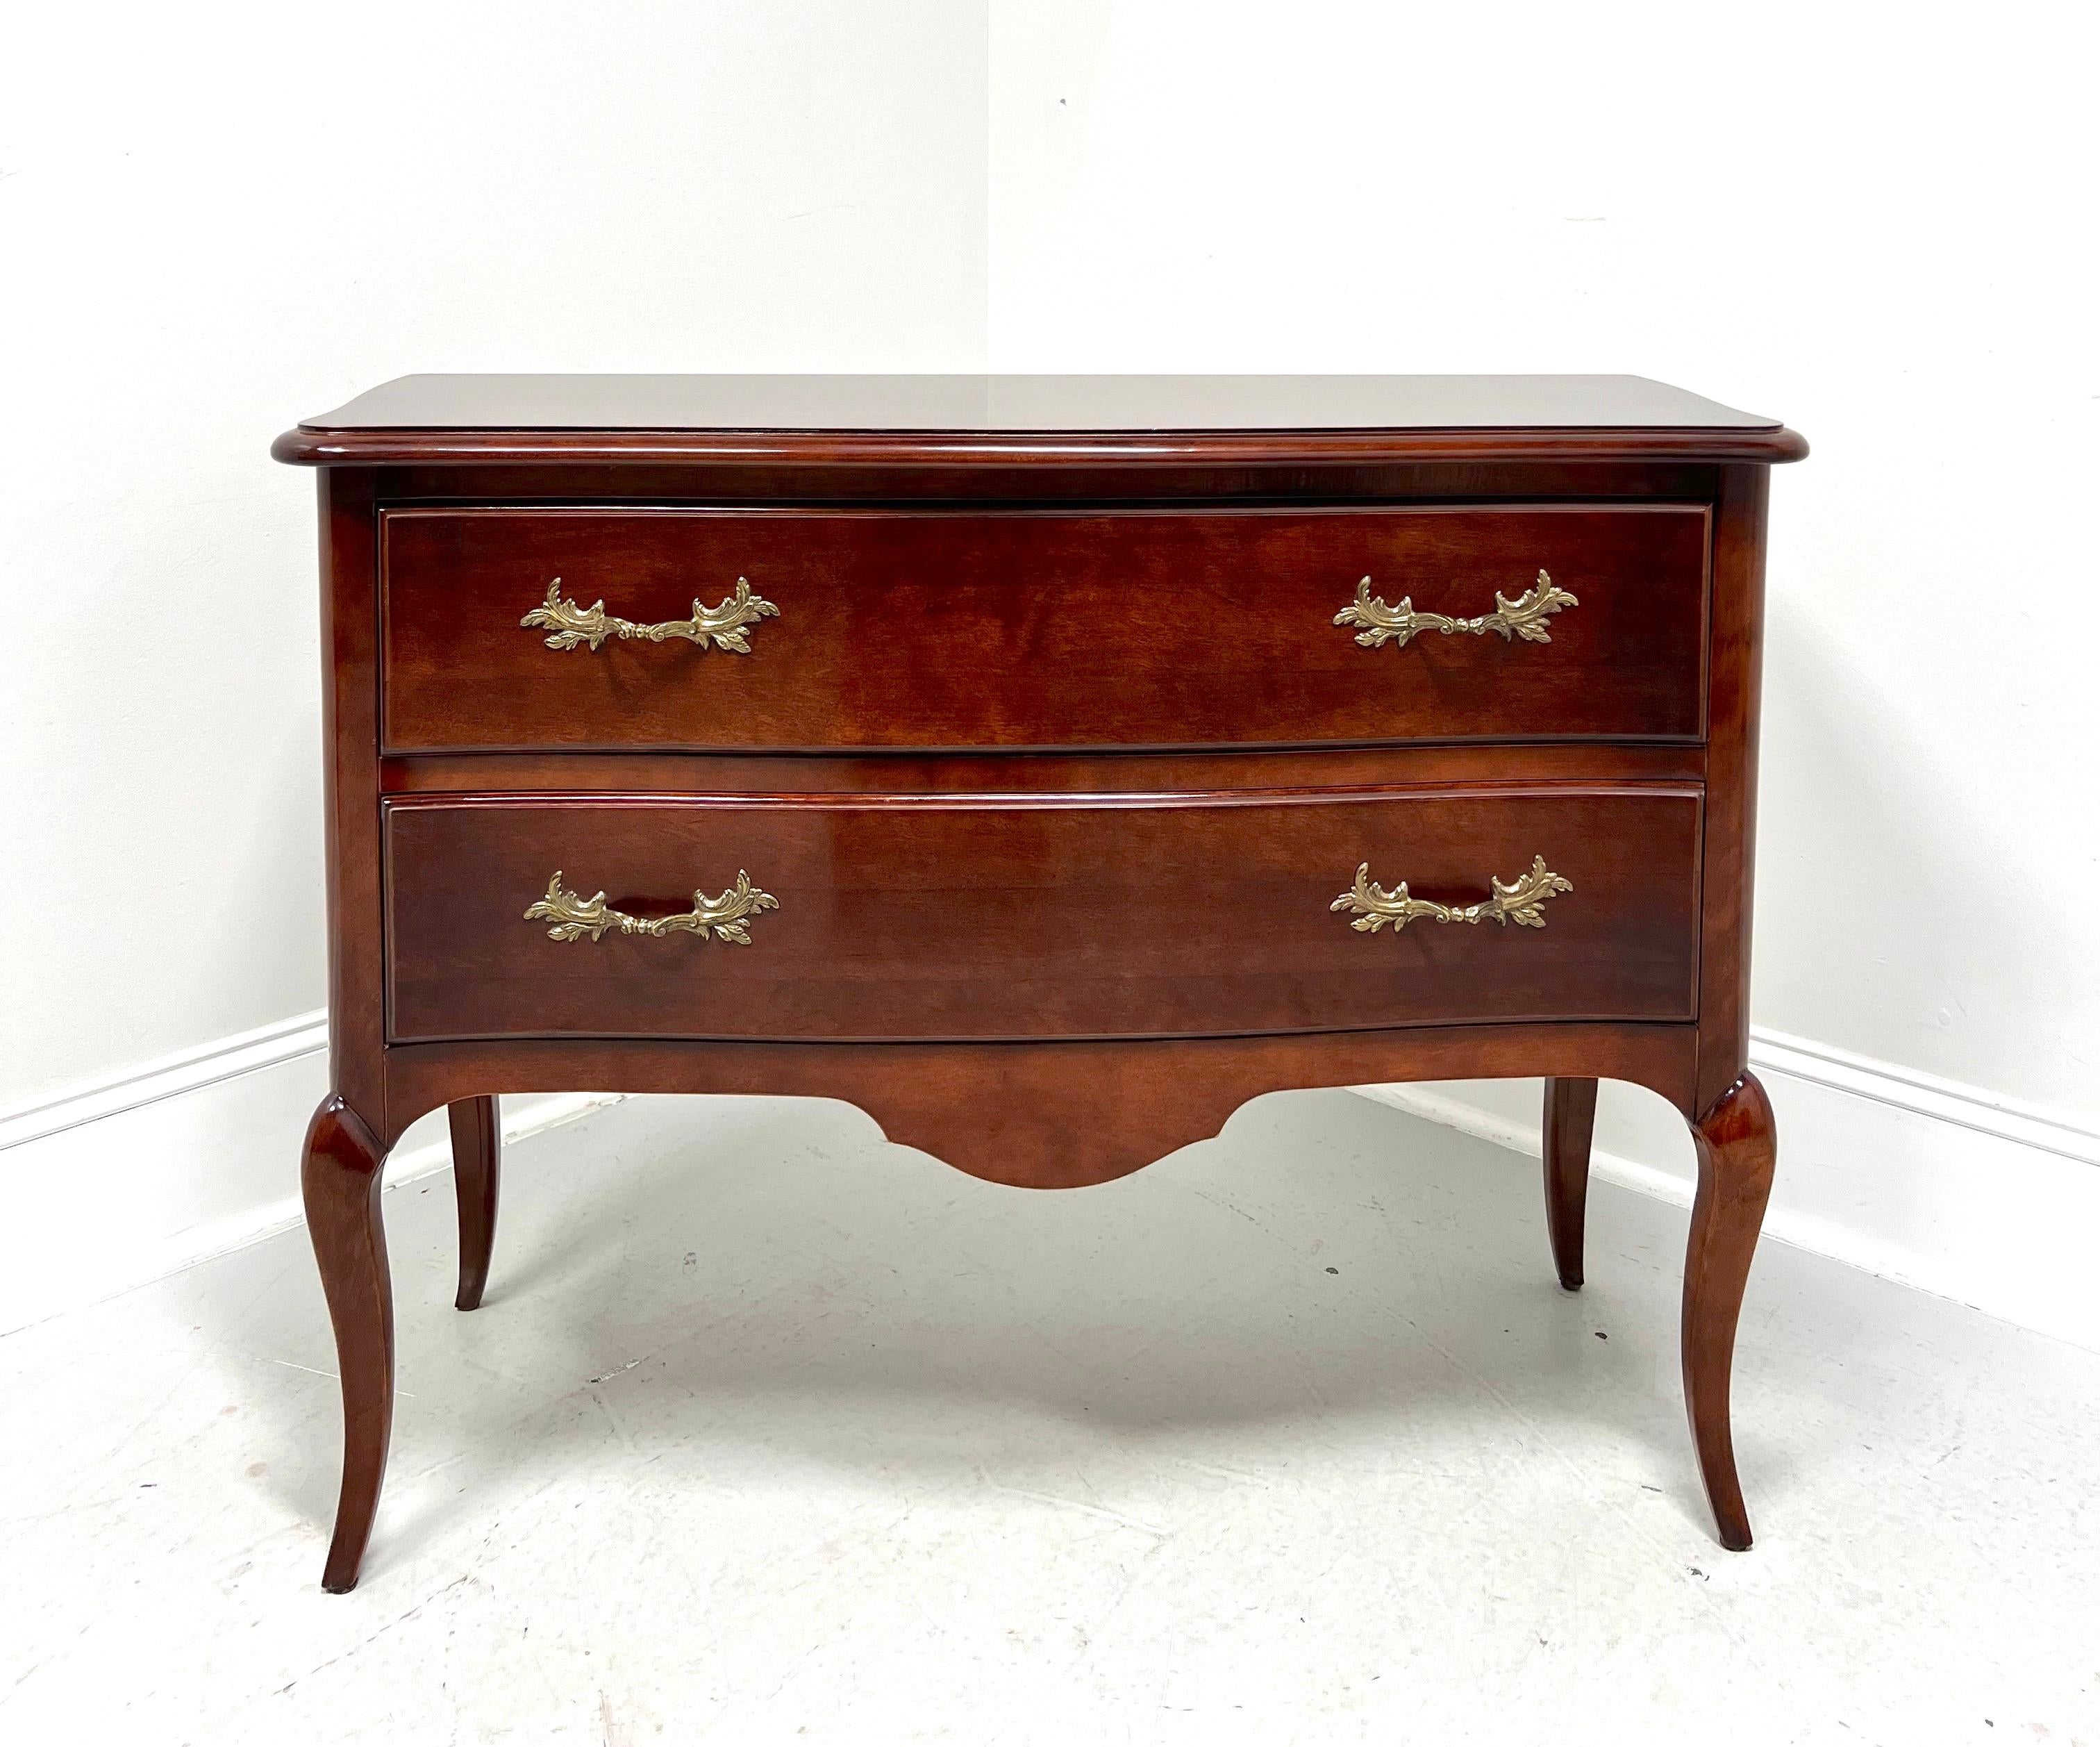 A French Provincial Louis XV style occasional chest, unbranded, similar quality to Century Furniture or Henredon. Cherry wood with brass hardware, ogee edge to the top, carved apron, and curved legs. Features two drawers of dovetail construction.